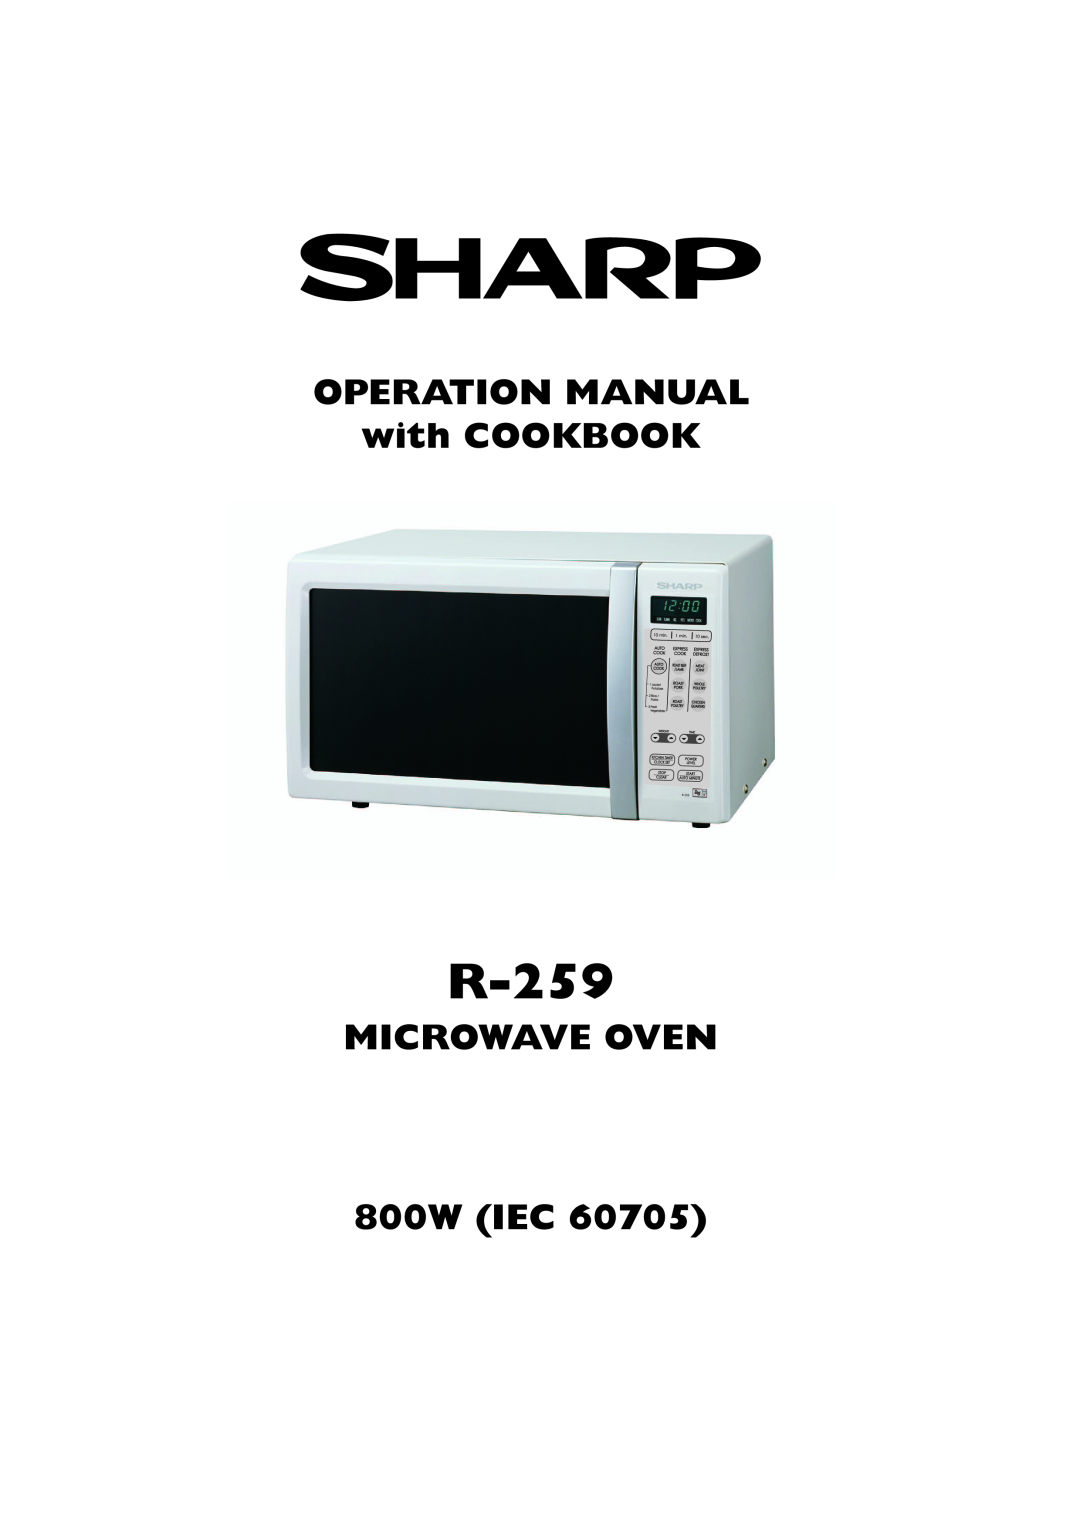 Sharp R-259 operation manual OPERATION MANUAL with COOKBOOK, Microwave Oven, 800W IEC 